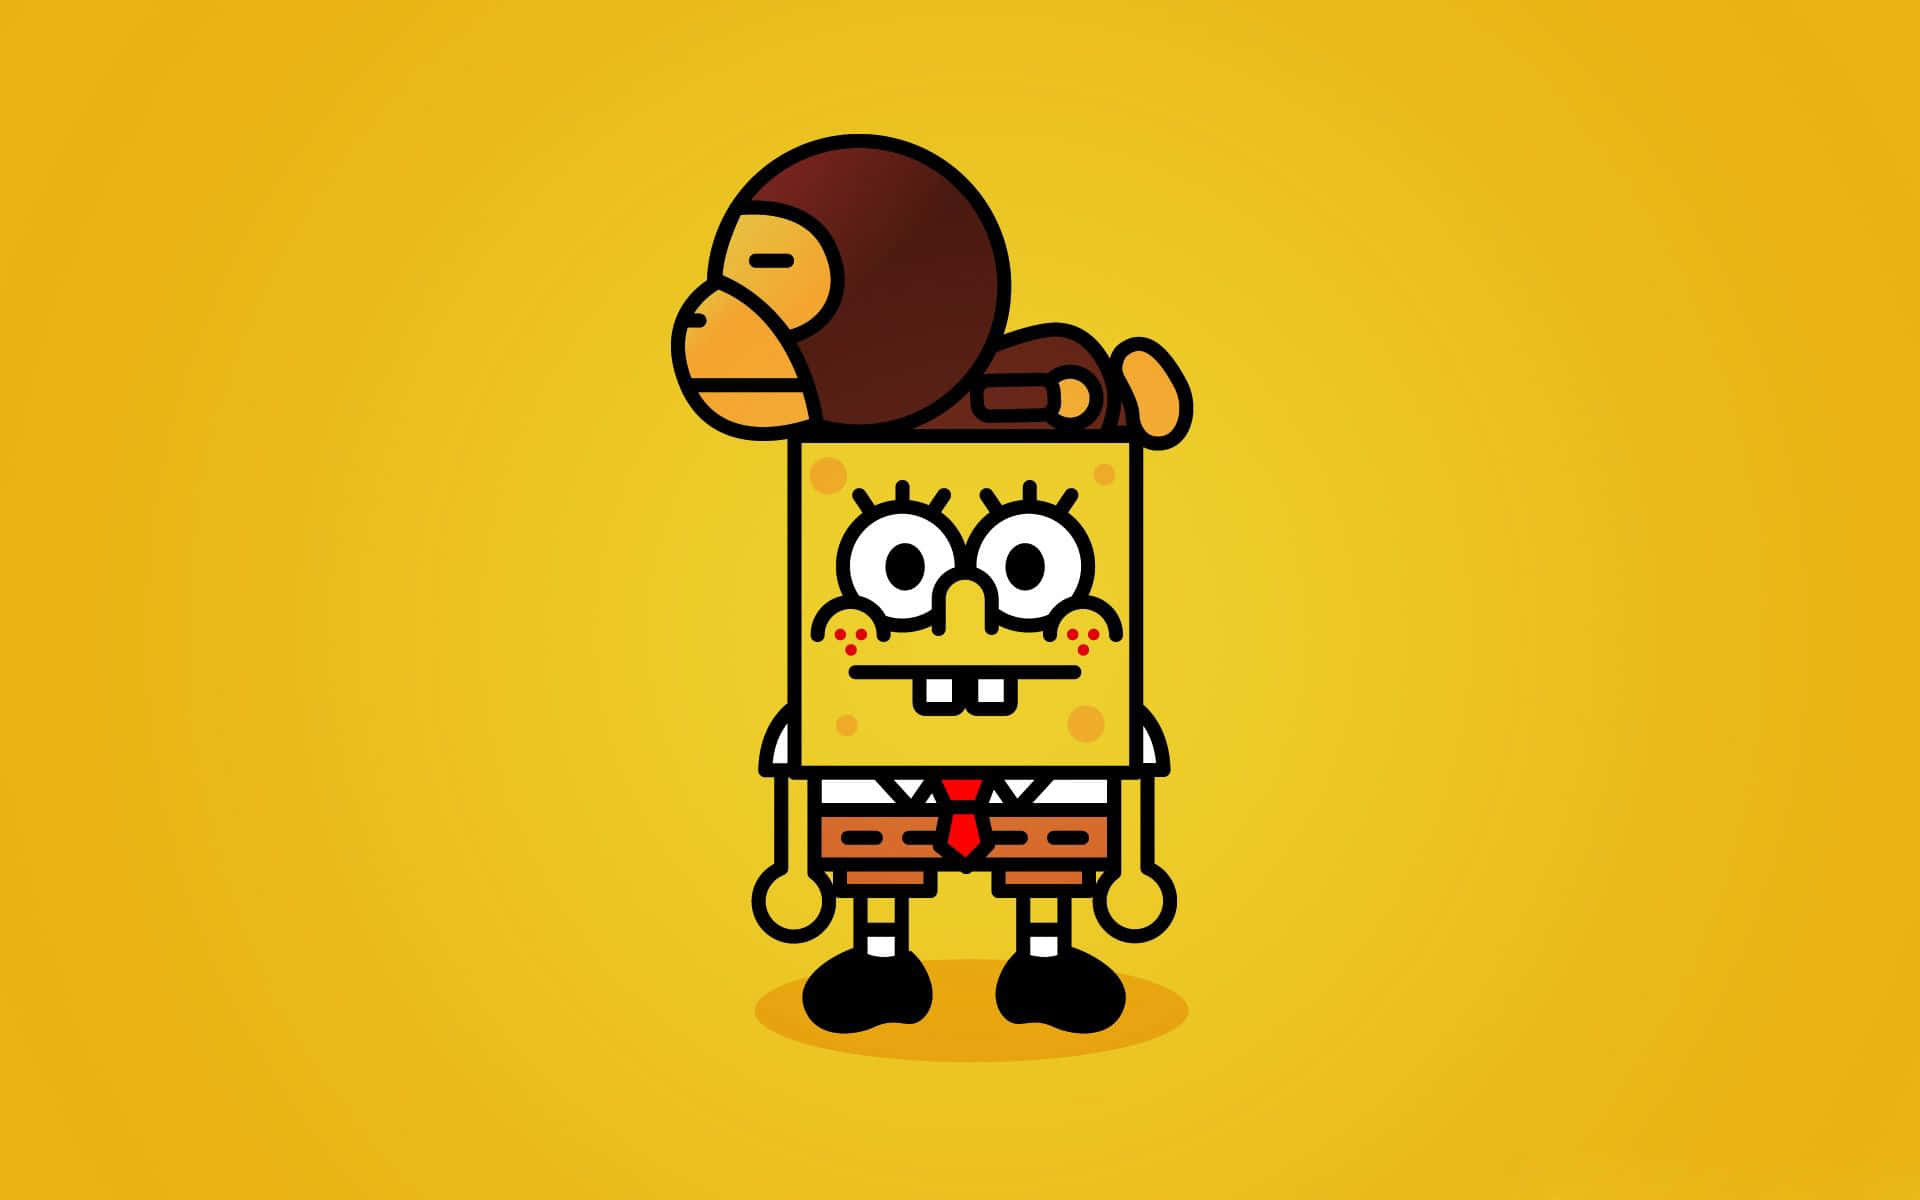 Give your laptop a burst of Spongebob energy with this aesthetically pleasing Spongebob sticker! Wallpaper